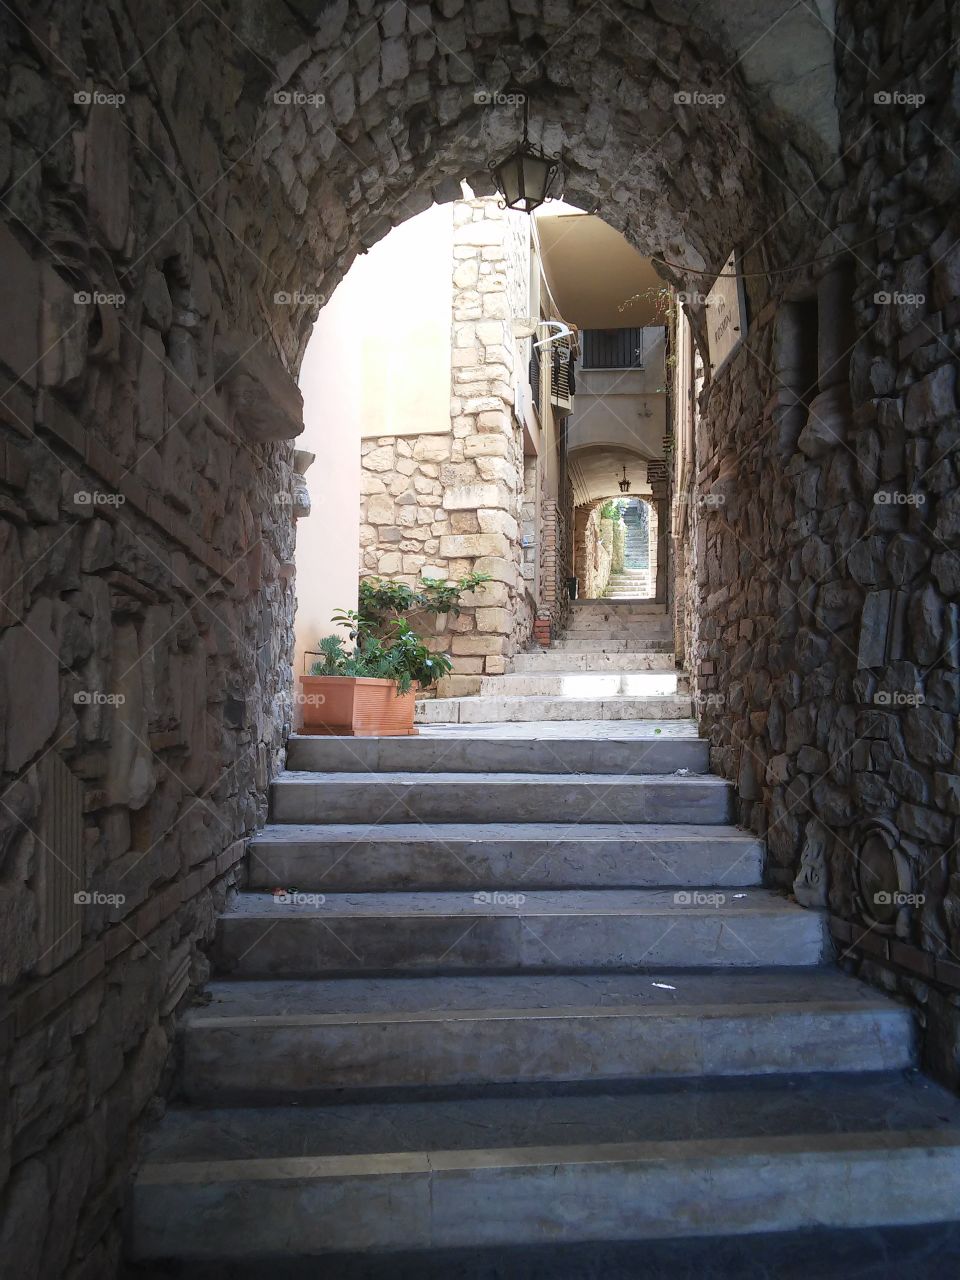 Ancient alley. One alley of the medieval quarter of Gaeta, Italy.